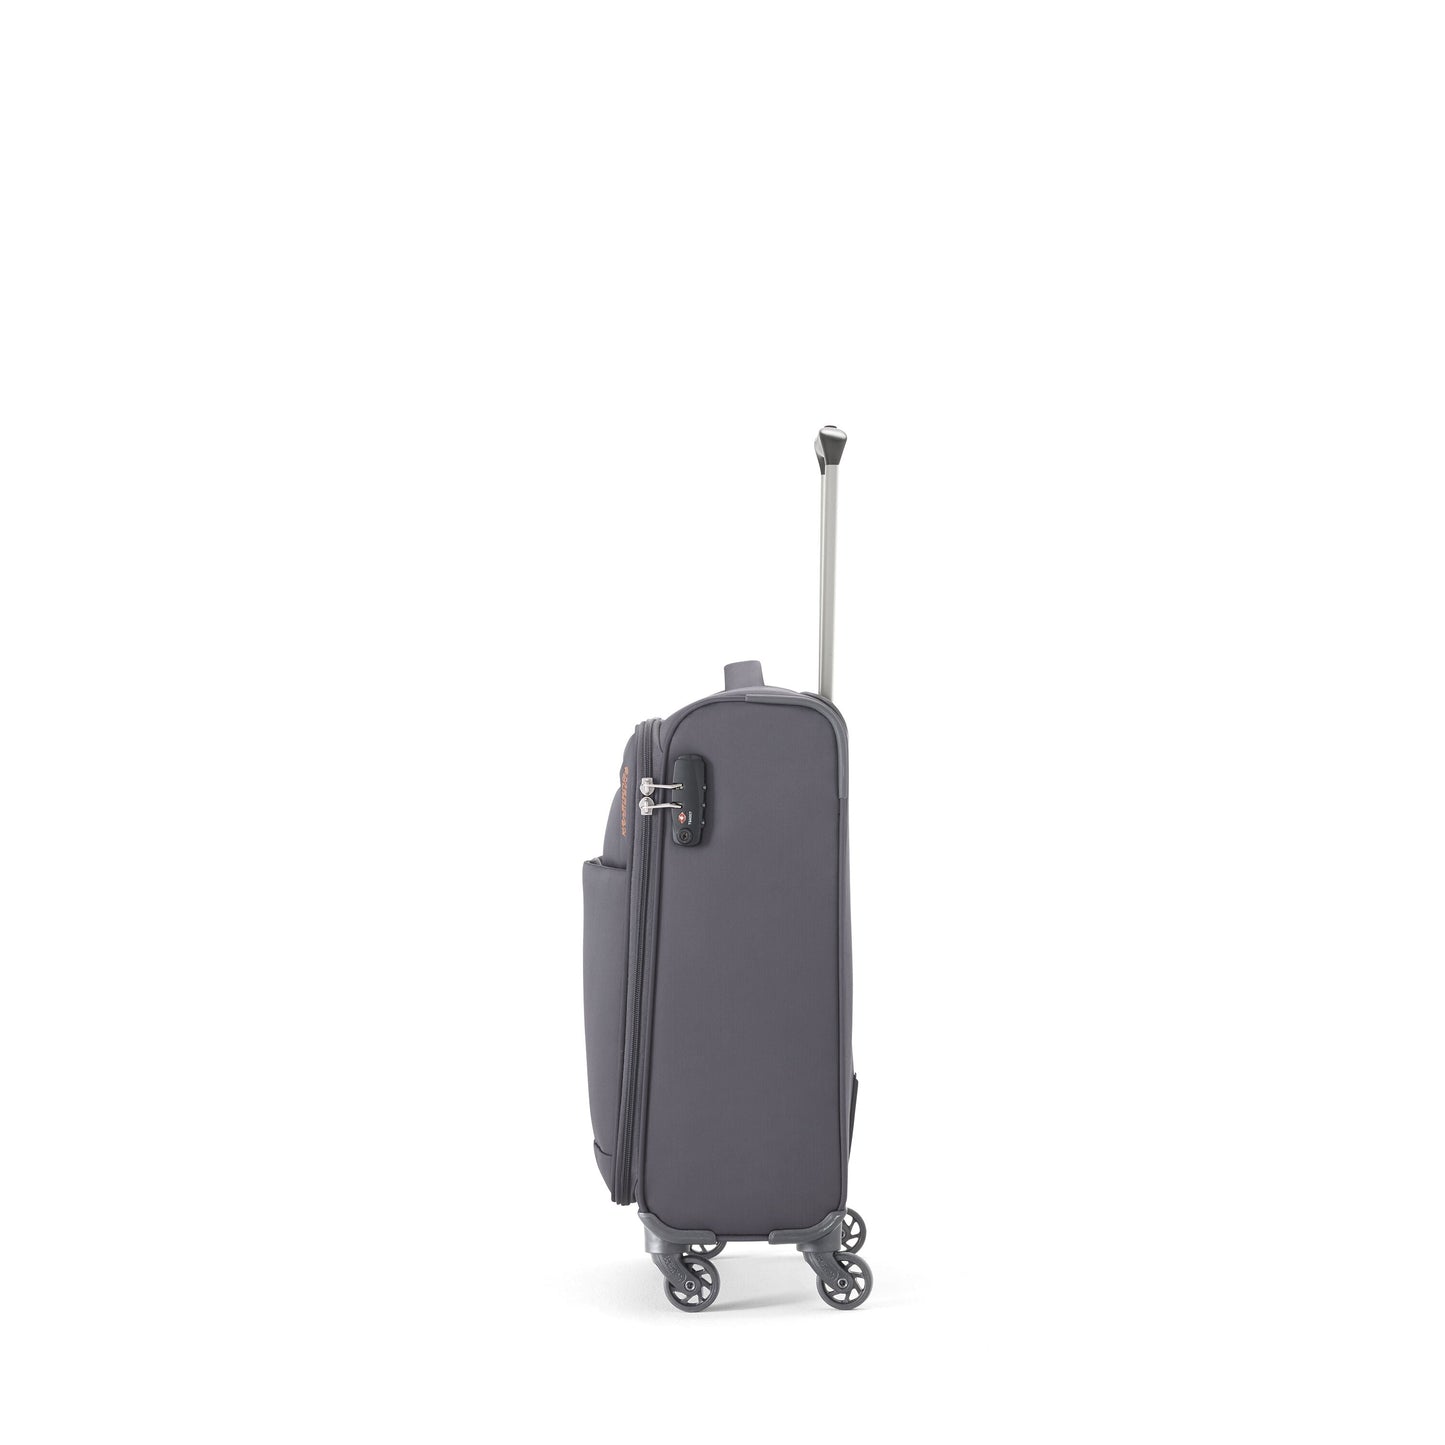 American Tourister Bayview NXT Spinner Softside Carry-On Luggage